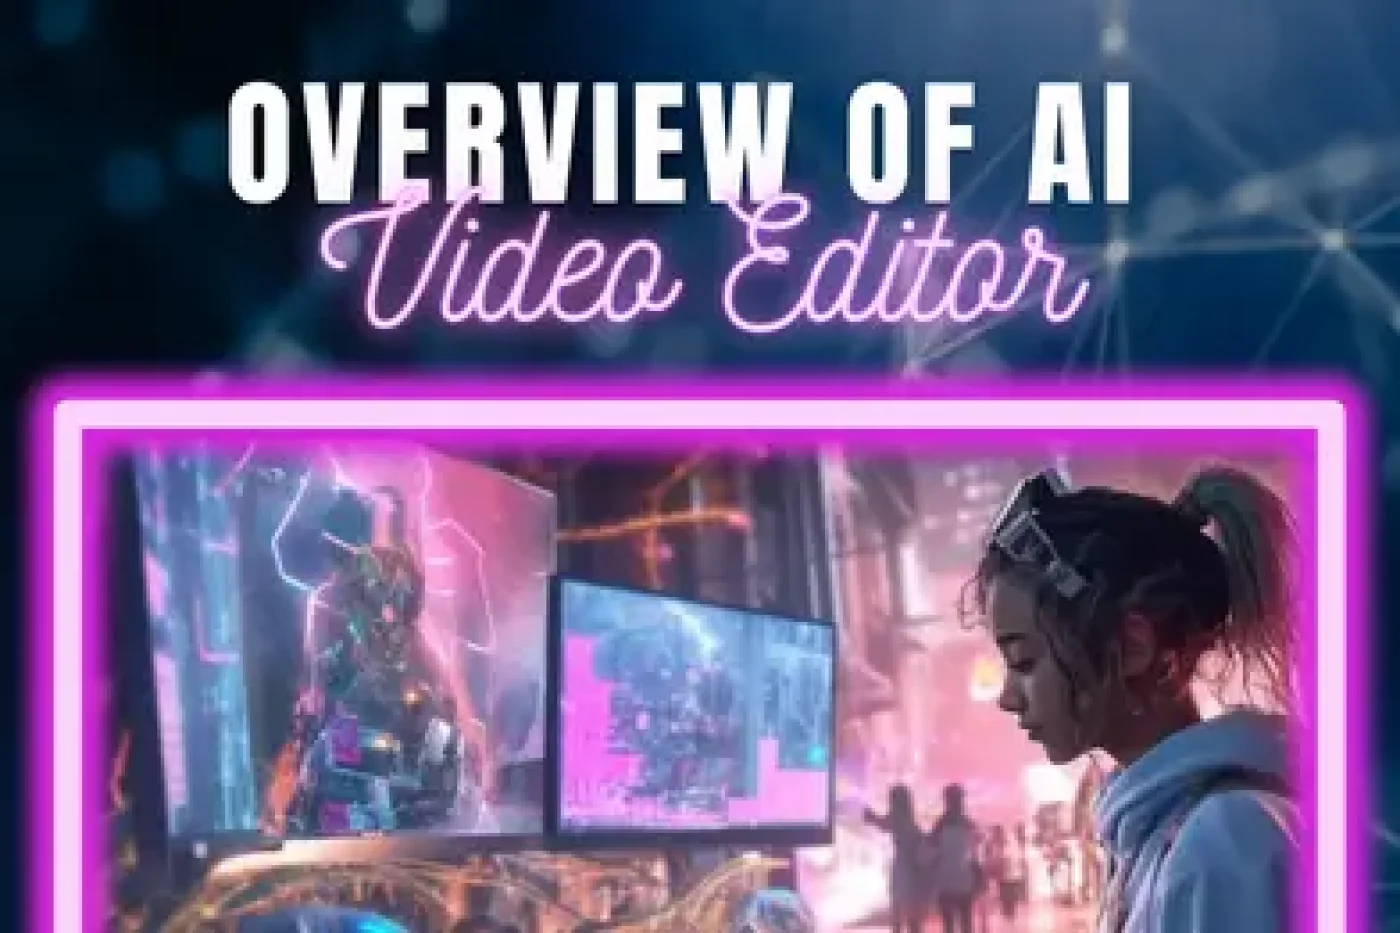 AI Video Editing: Overview of AI Video Editor